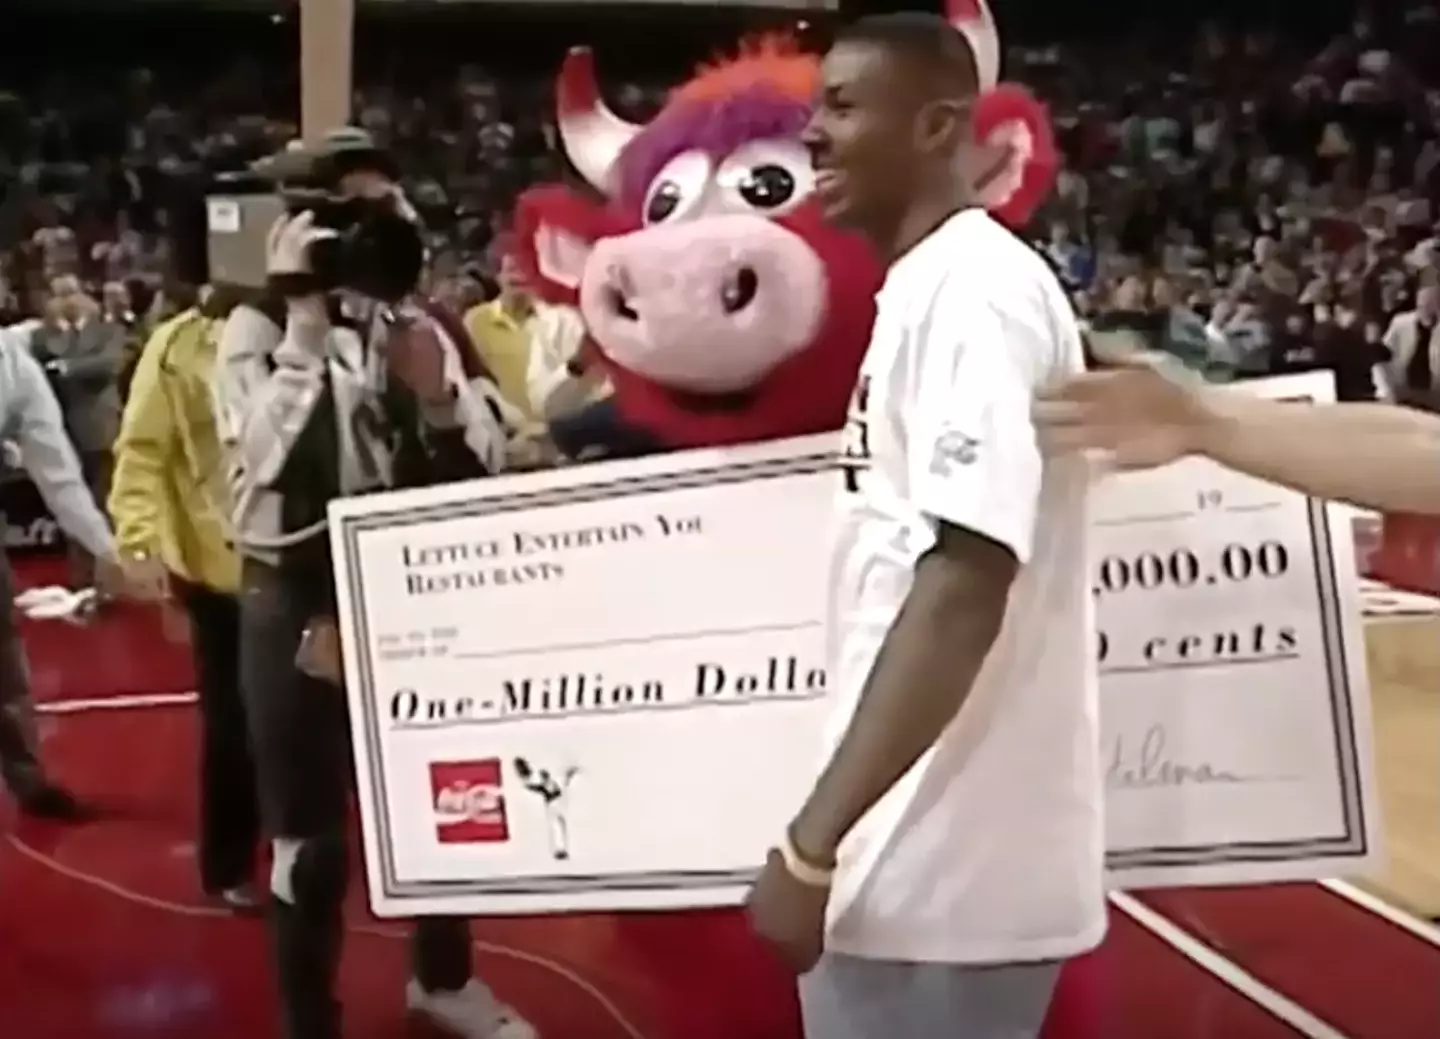 Calhoun ended up receiving his prize money, thanks to the Bulls and other sponsors.